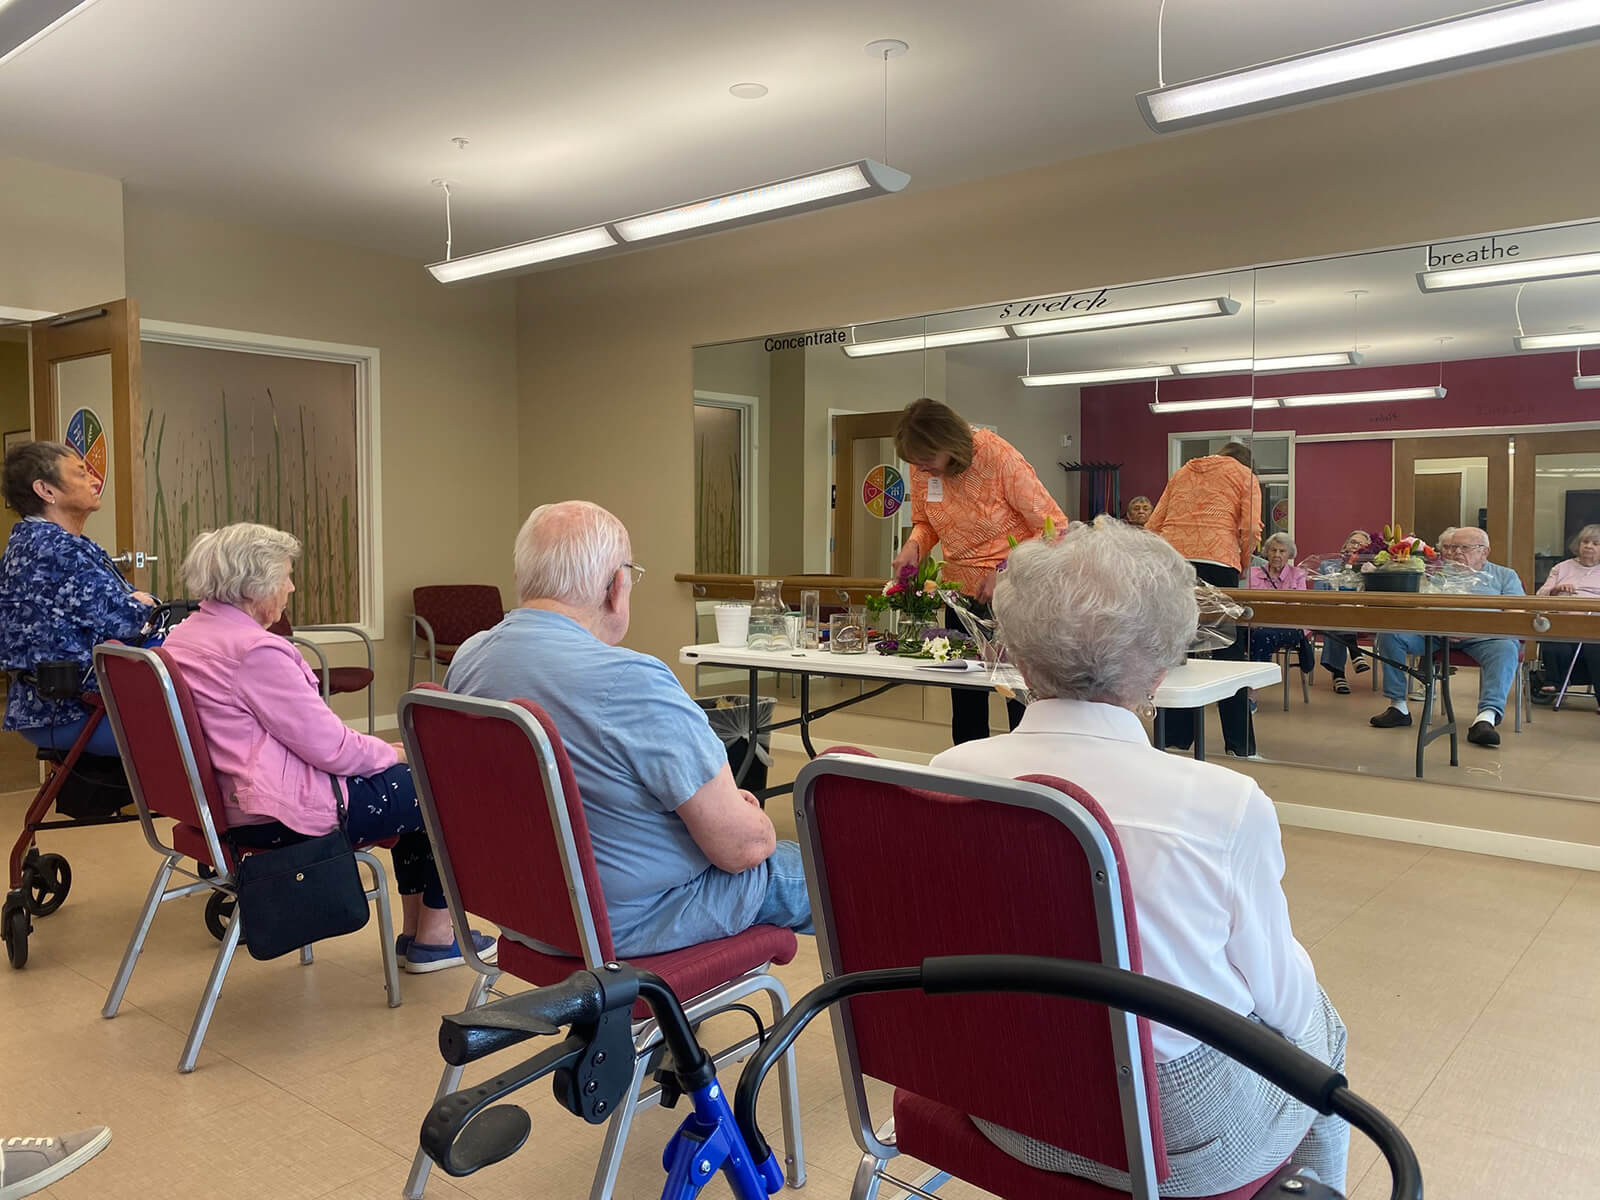 Seniors at The Waters on 50th in Minneapolis participating in a flower arrangement class, engaging in creative activity.